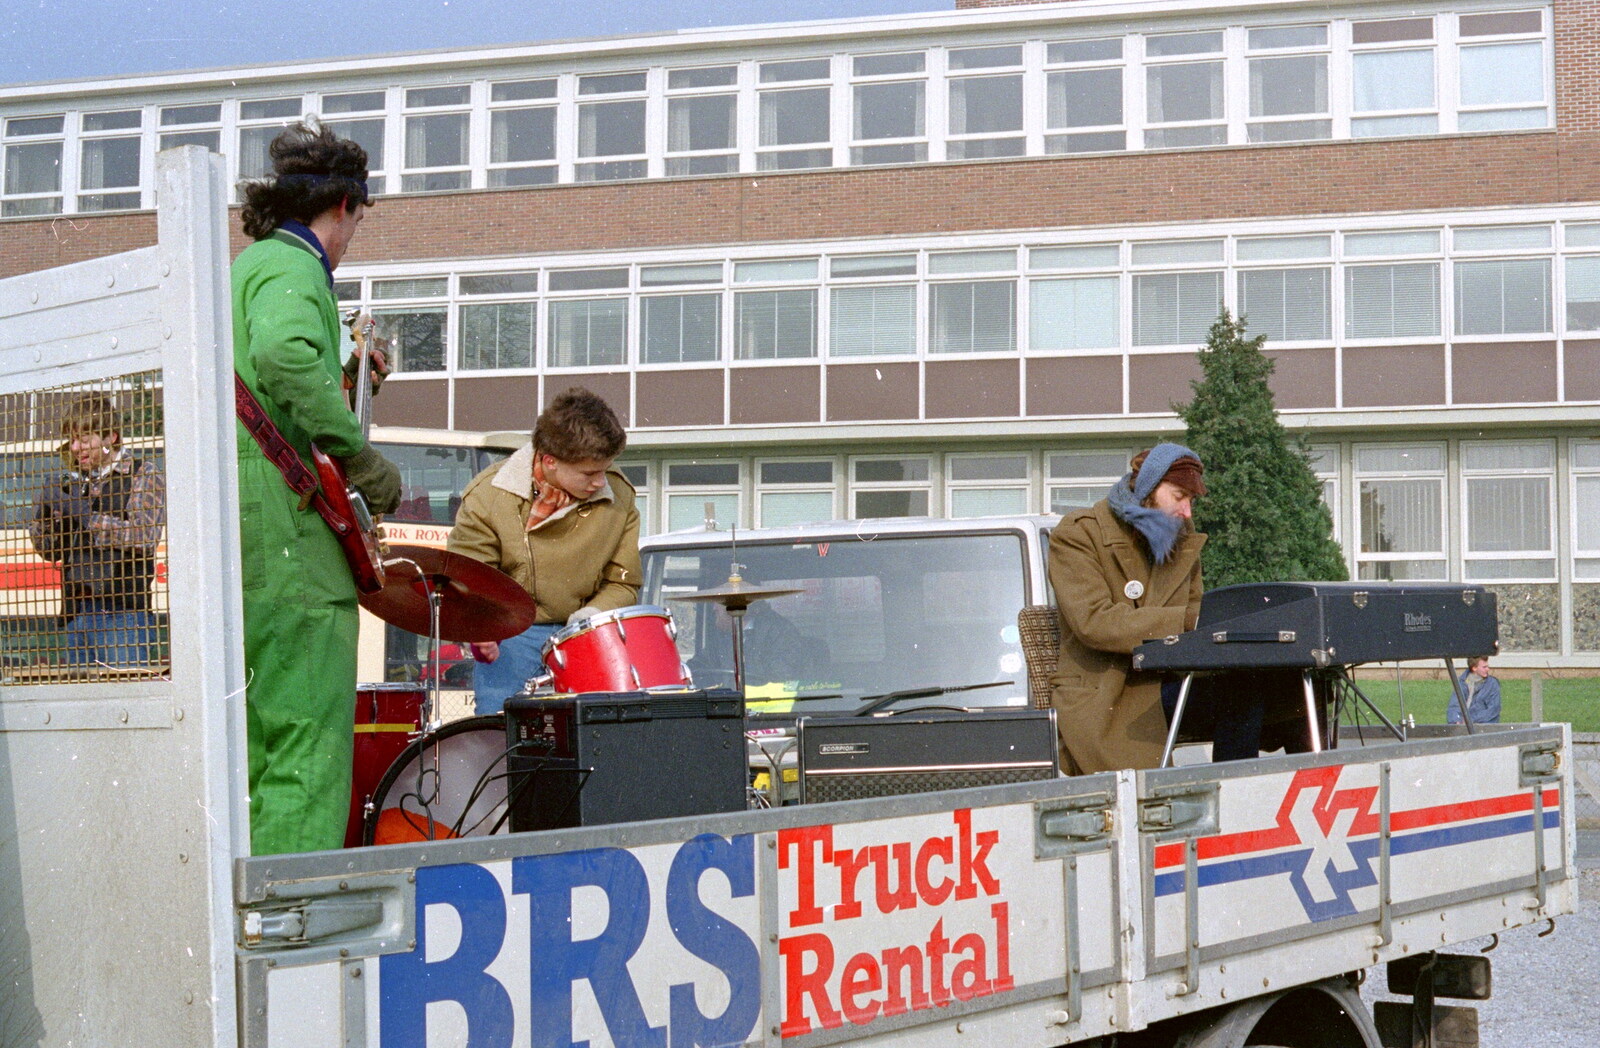 A band on a van outside the Engineering Block from Uni: PPSU "Jazz" RAG Street Parade, Plymouth, Devon - 17th February 1986